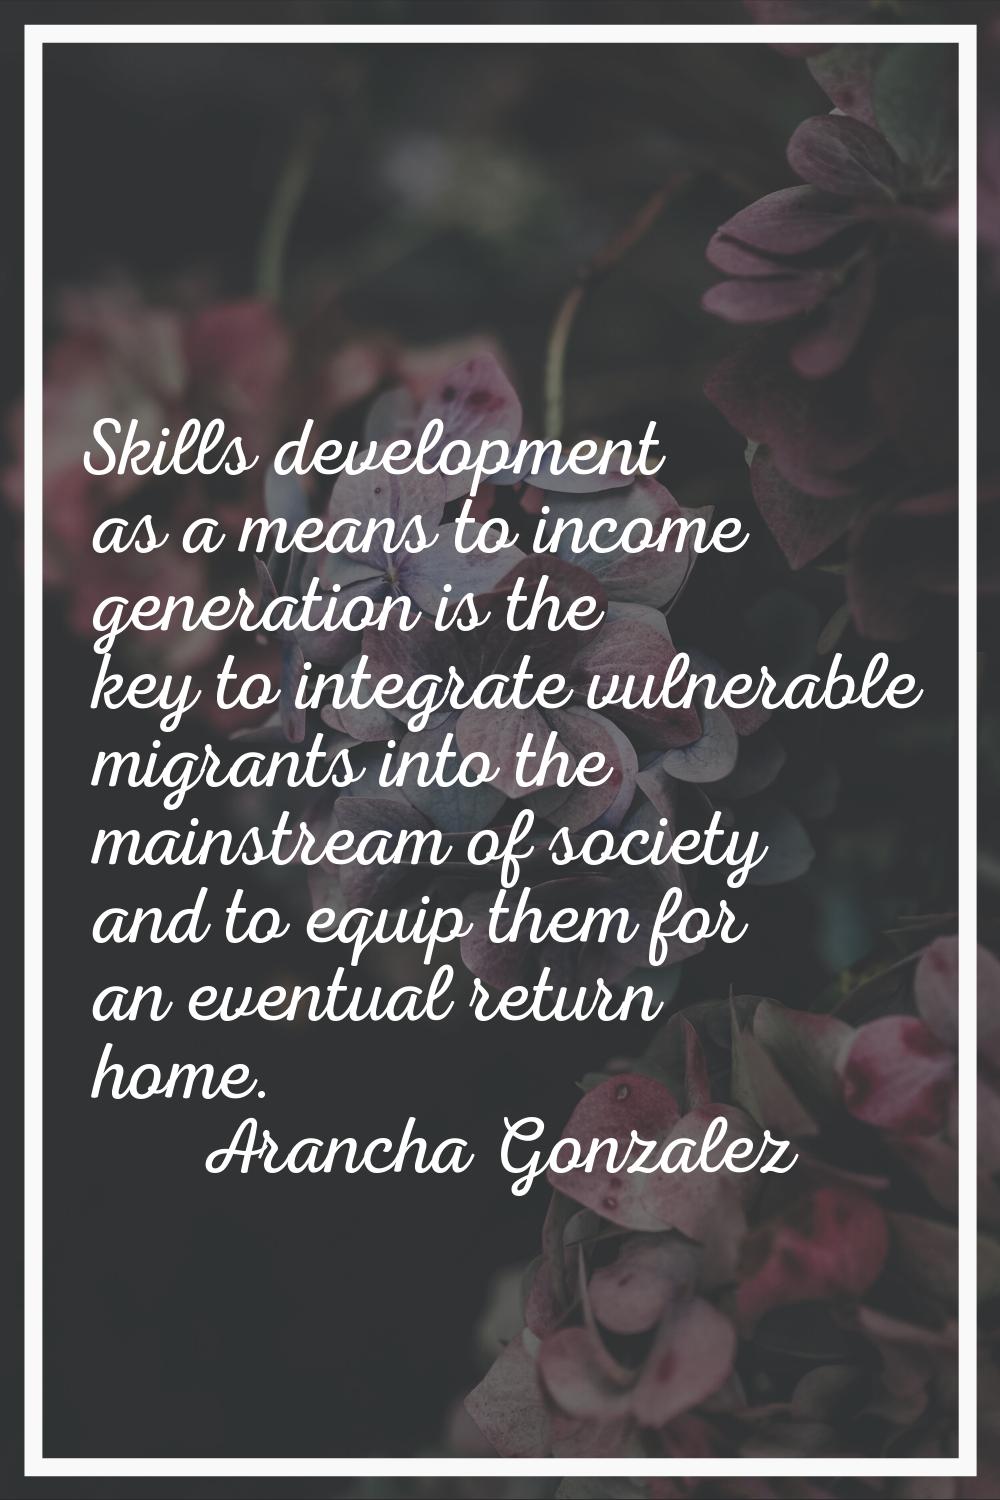 Skills development as a means to income generation is the key to integrate vulnerable migrants into